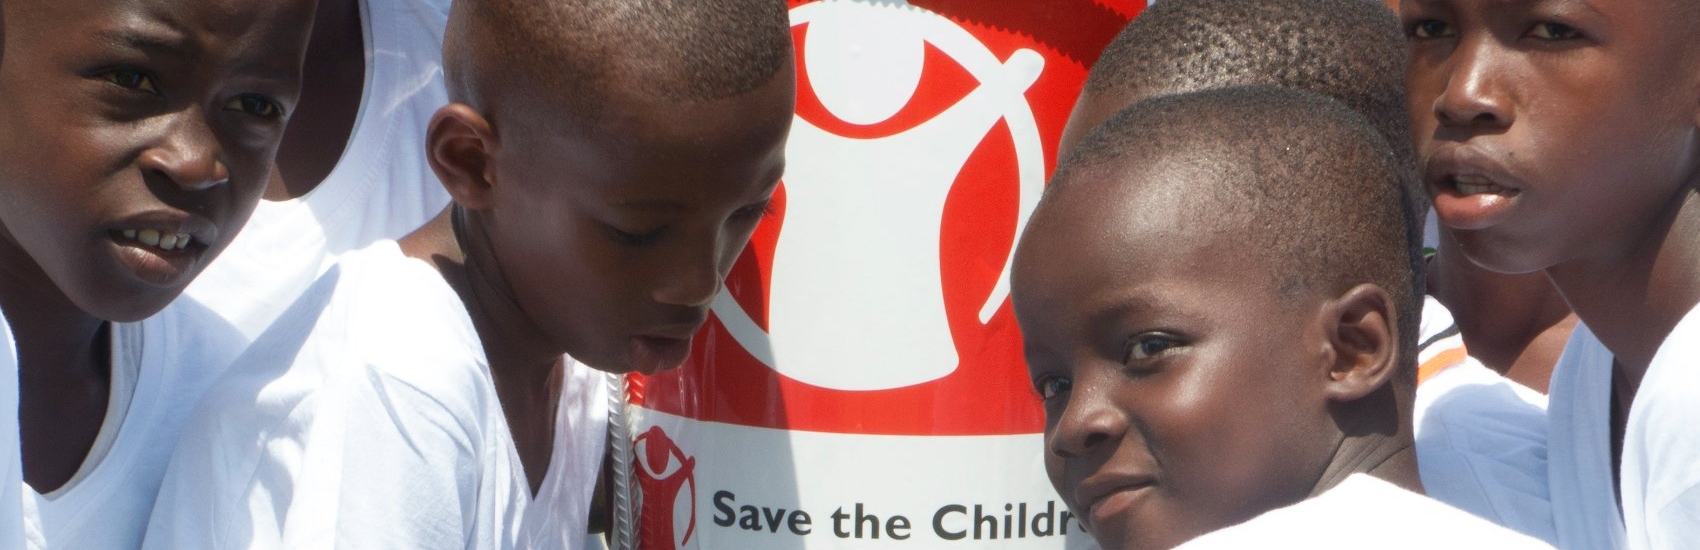 Save the children helped keep children free from Ebola in Guinea.